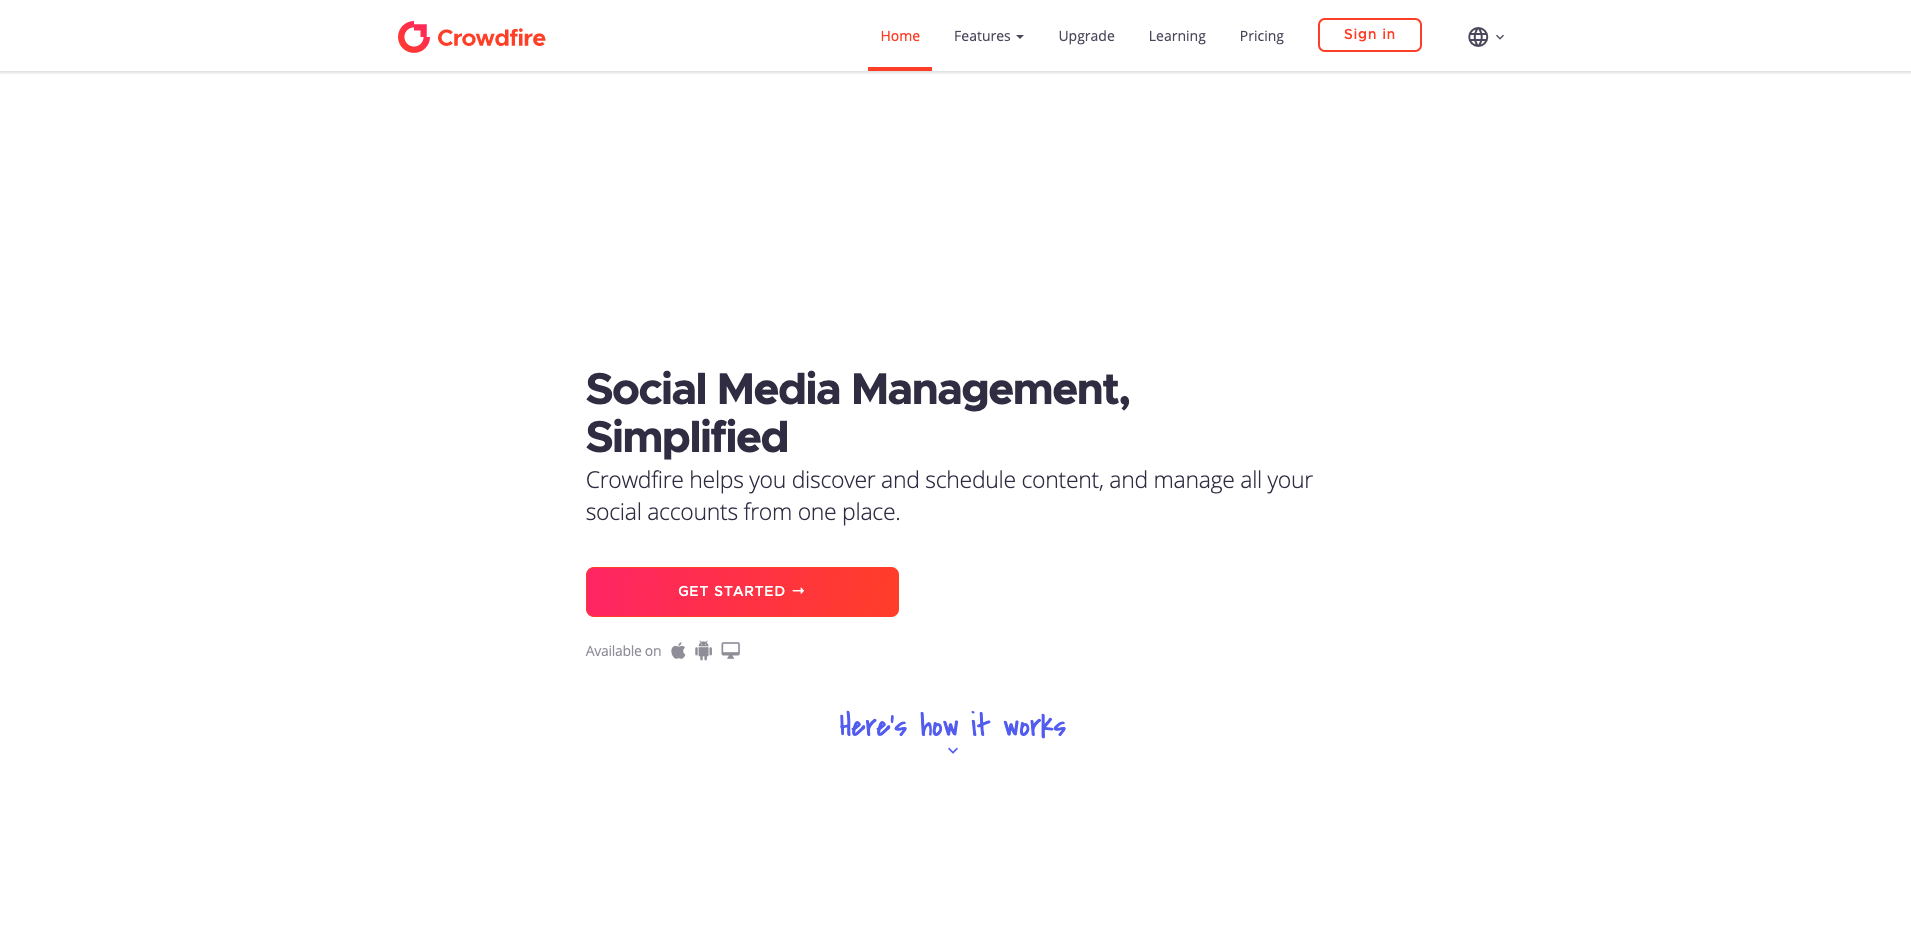 Crowdfire vs Hootsuite – Which Is The Best Social Media Management Tool In 2020?